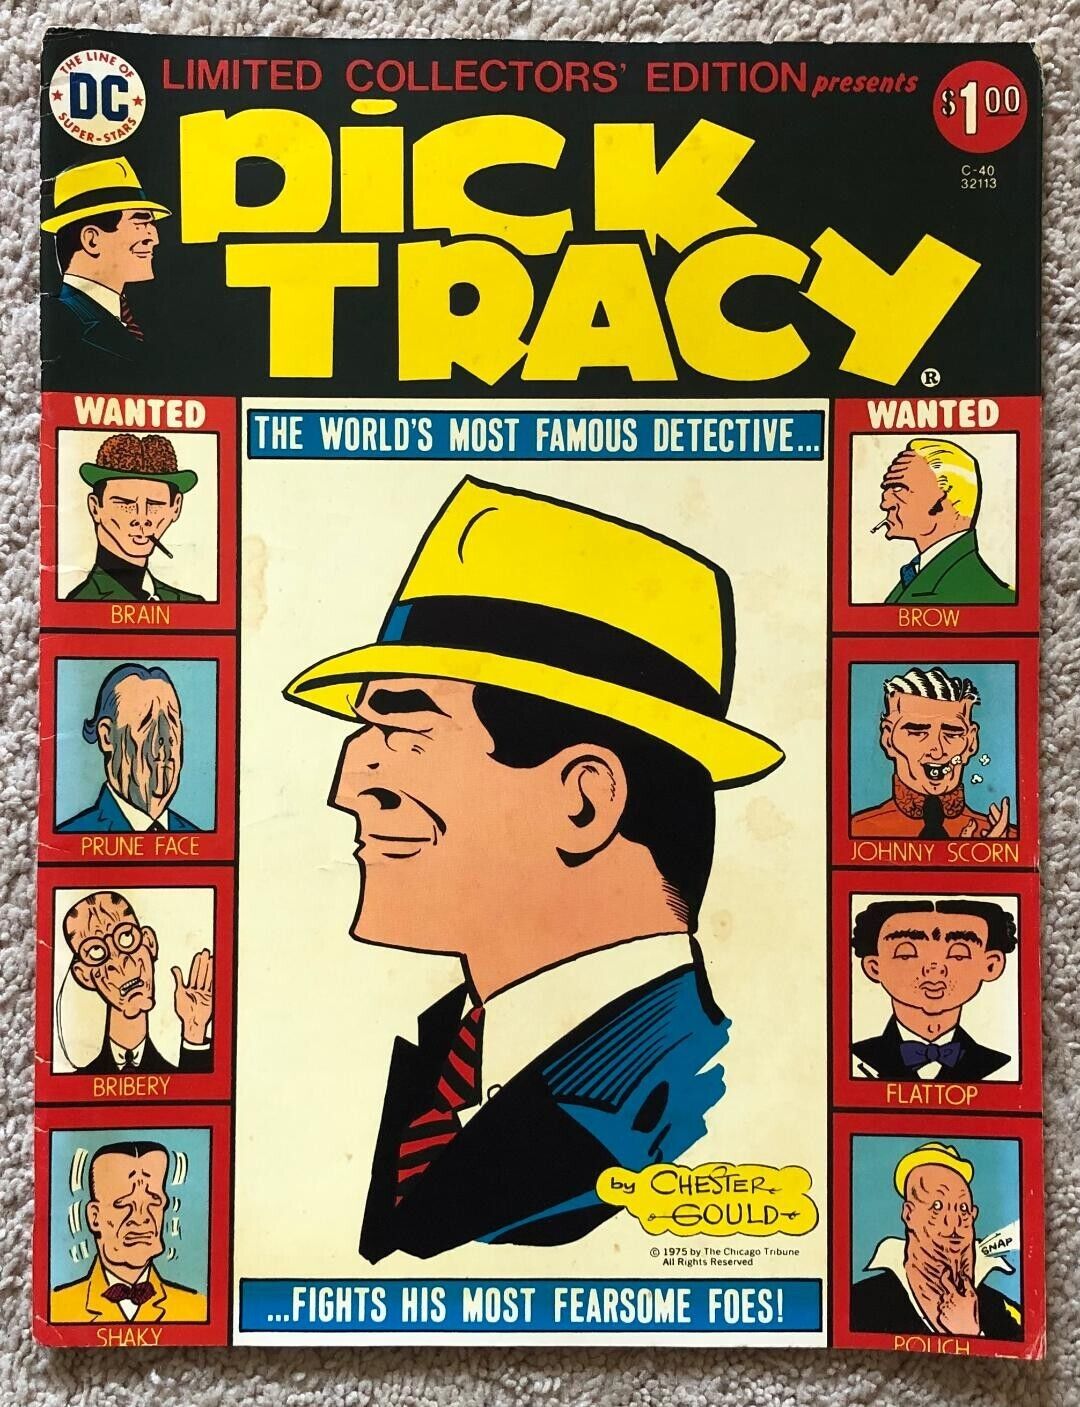 WoW DICK TRACY 1975/1976 Limited Collector's  Edition C- 40 Chester Gould